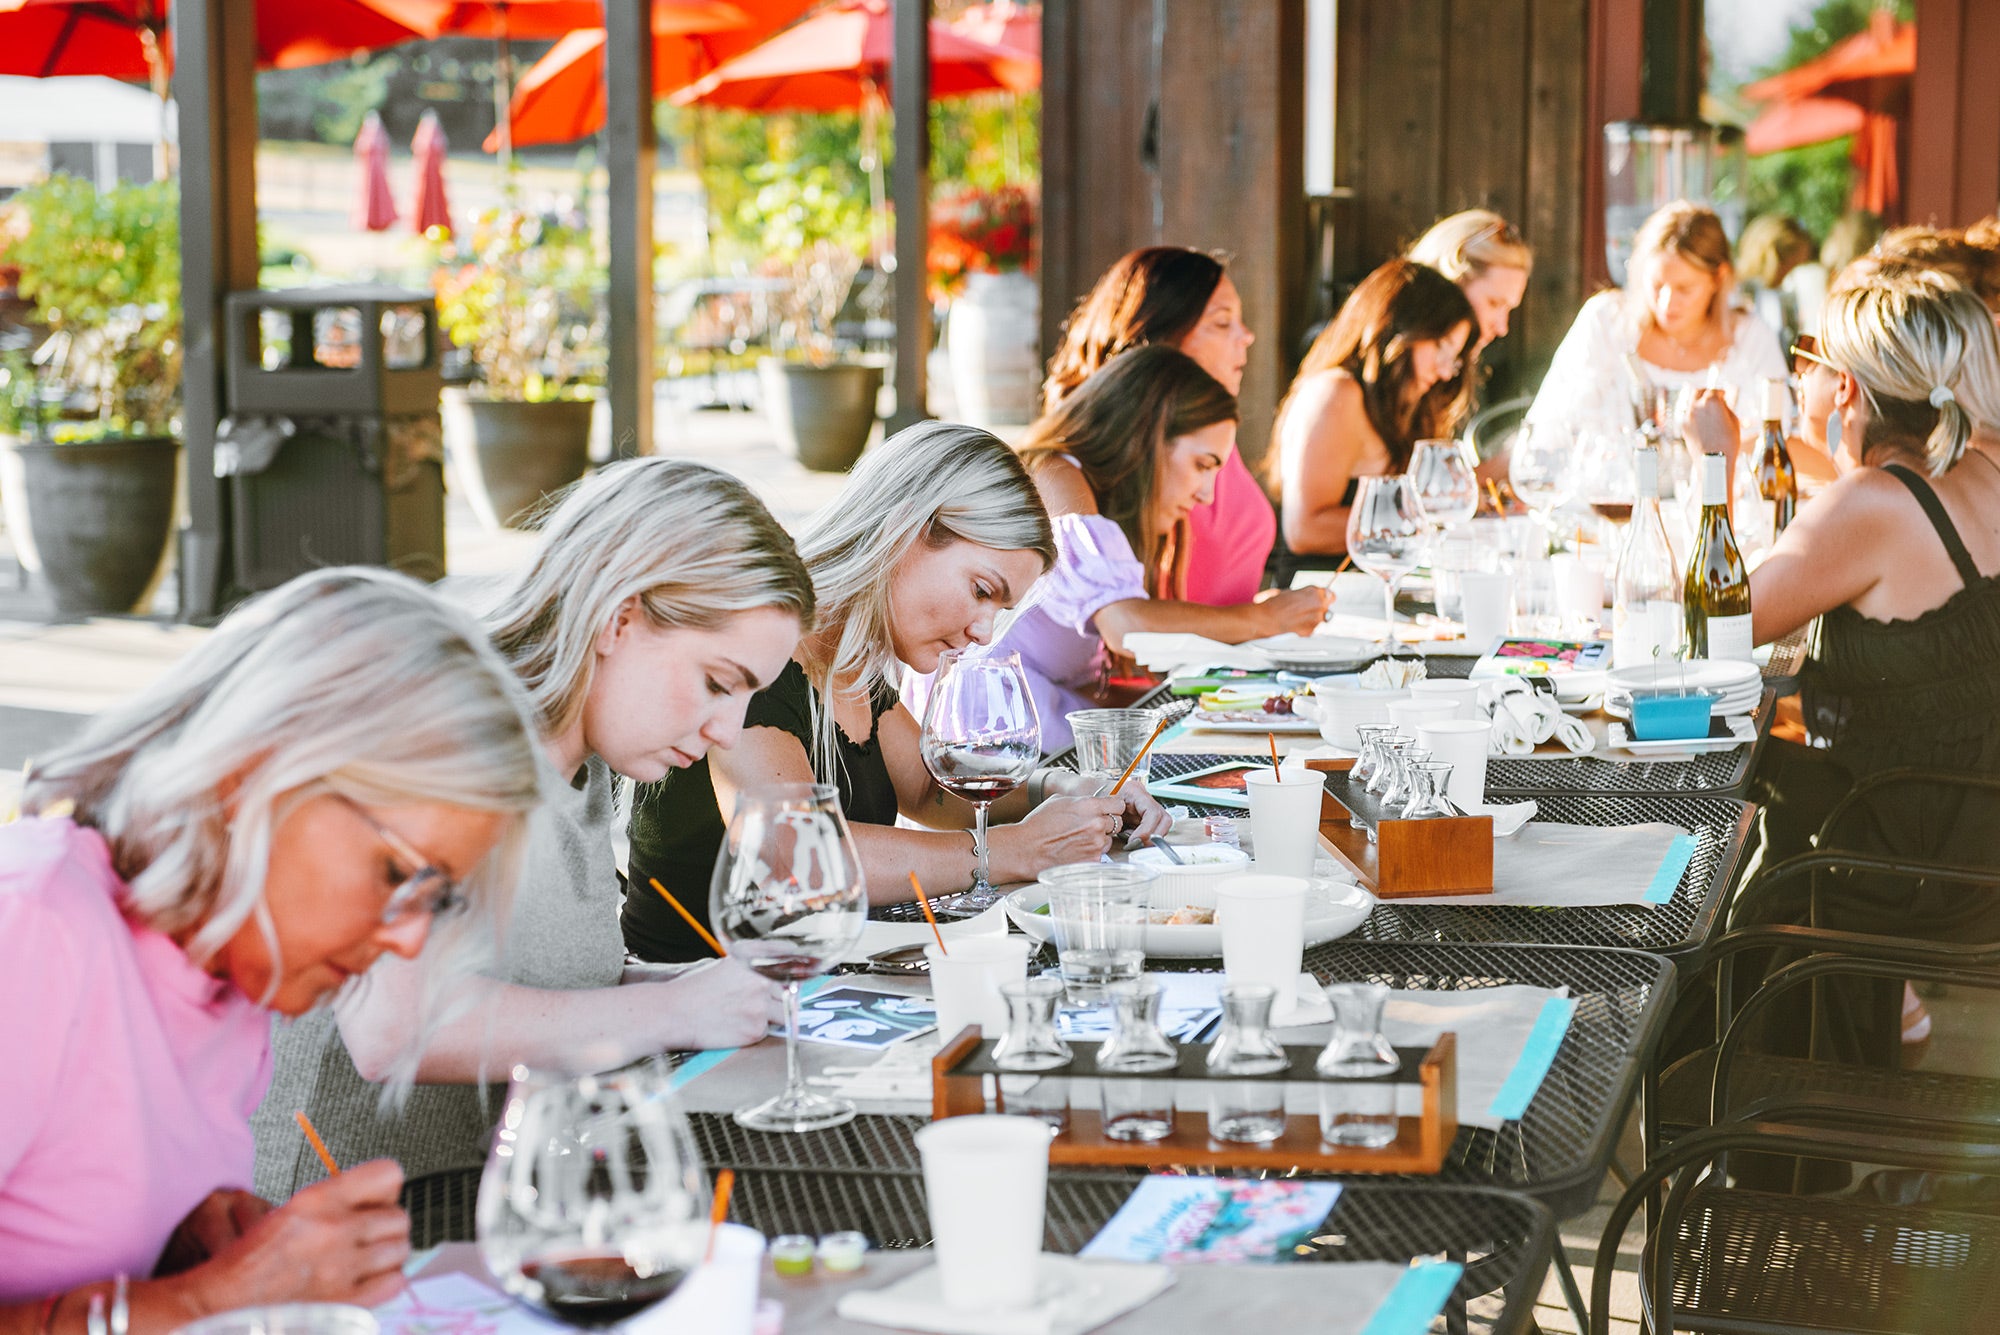 Women sitting at outdoor tables painting Elle Crée mini paint-by-number kits and drinking Tumwater Vineyard wine.